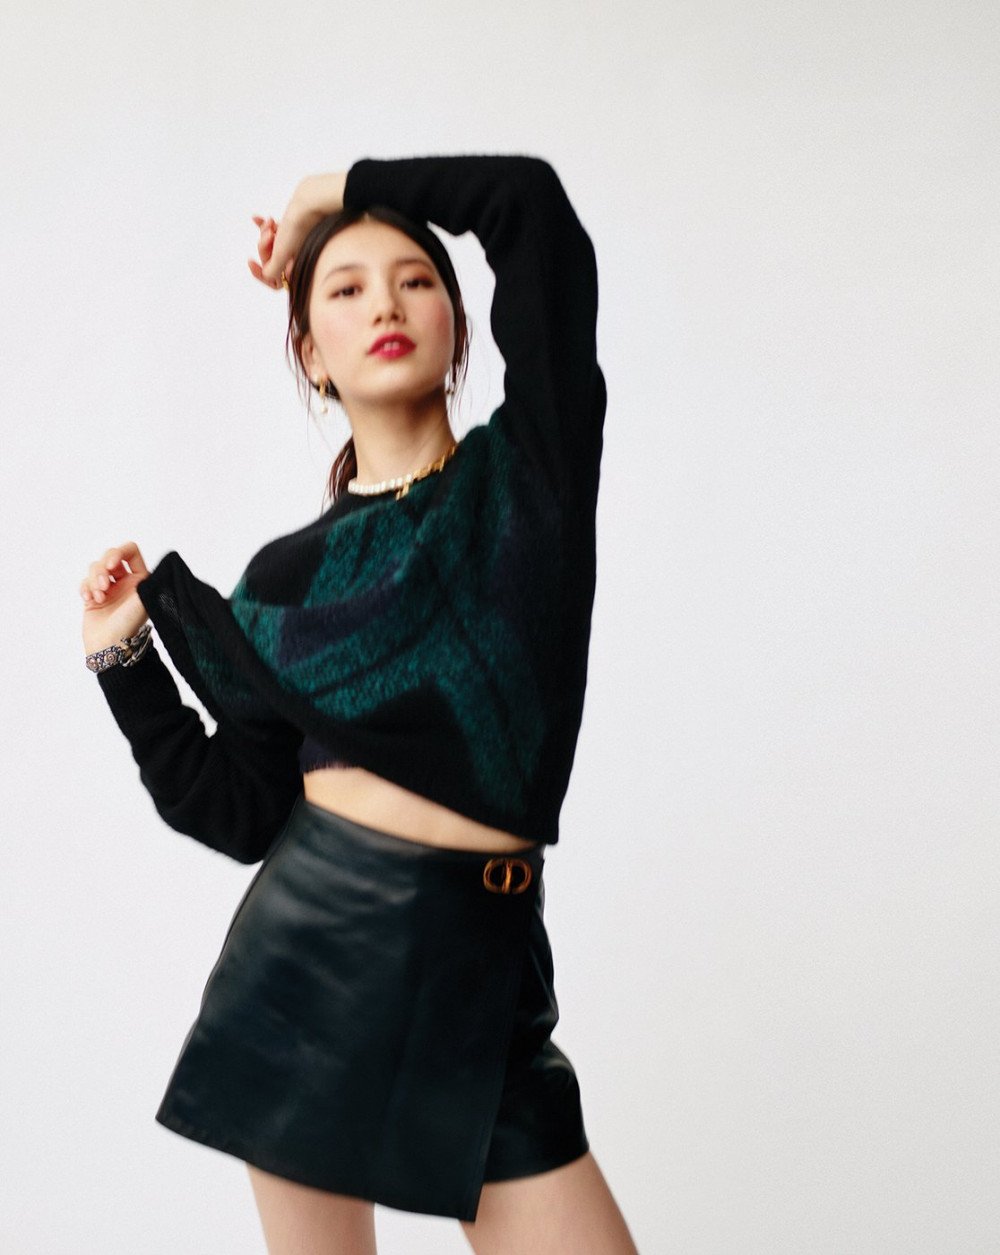 suzy-turns-into-fashion-icon-in-vogue-1-1